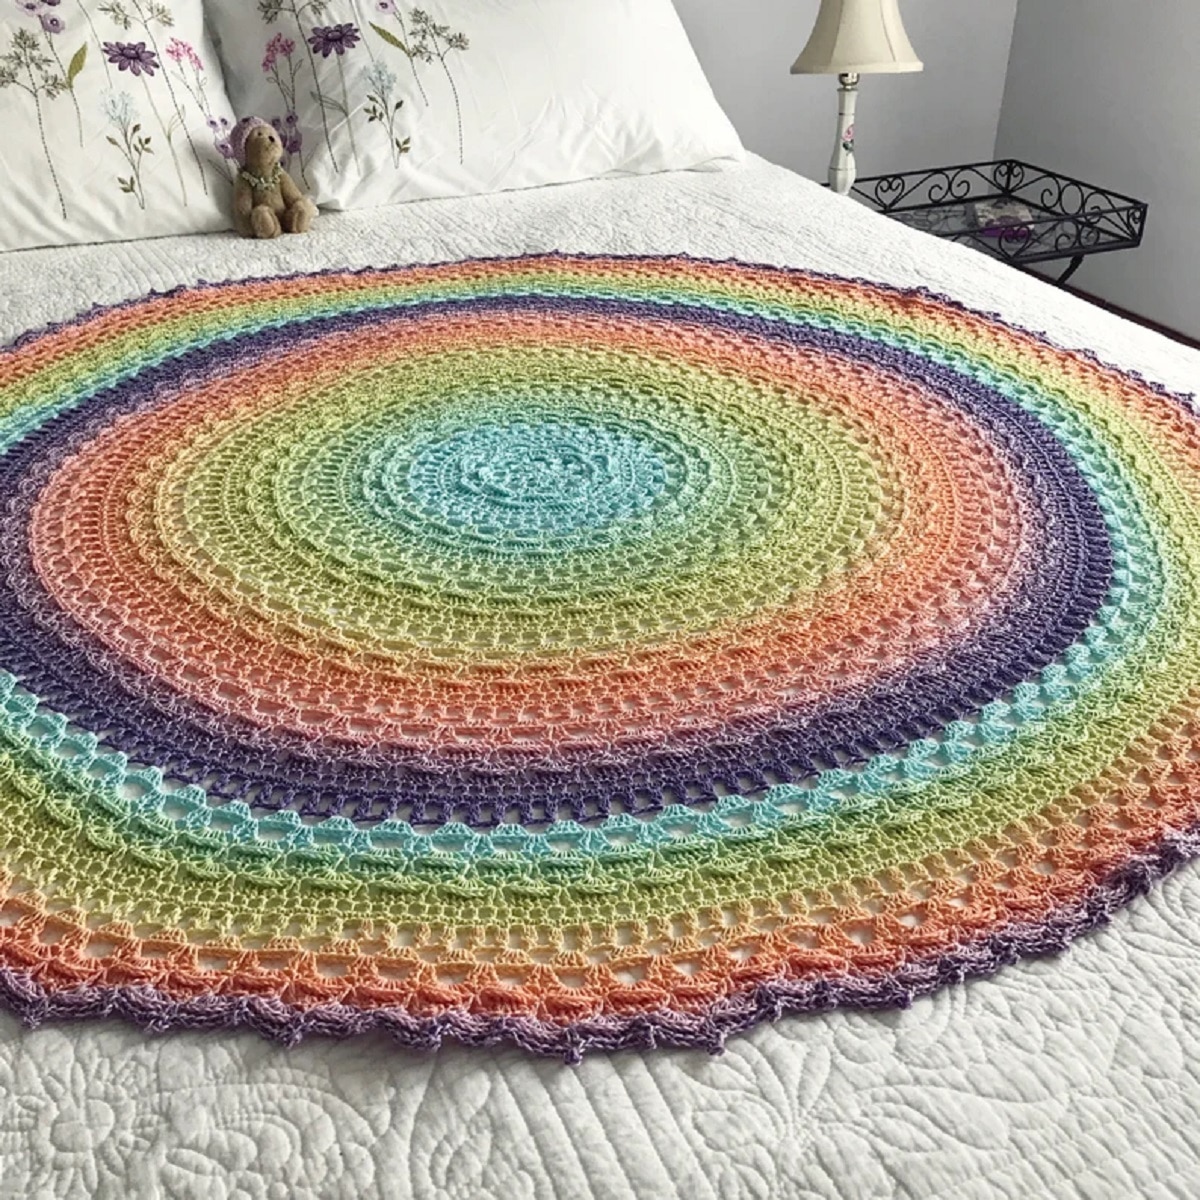 A round rainbow colored crochet mandala with circles getting smaller towards the center lying on a cream bed.